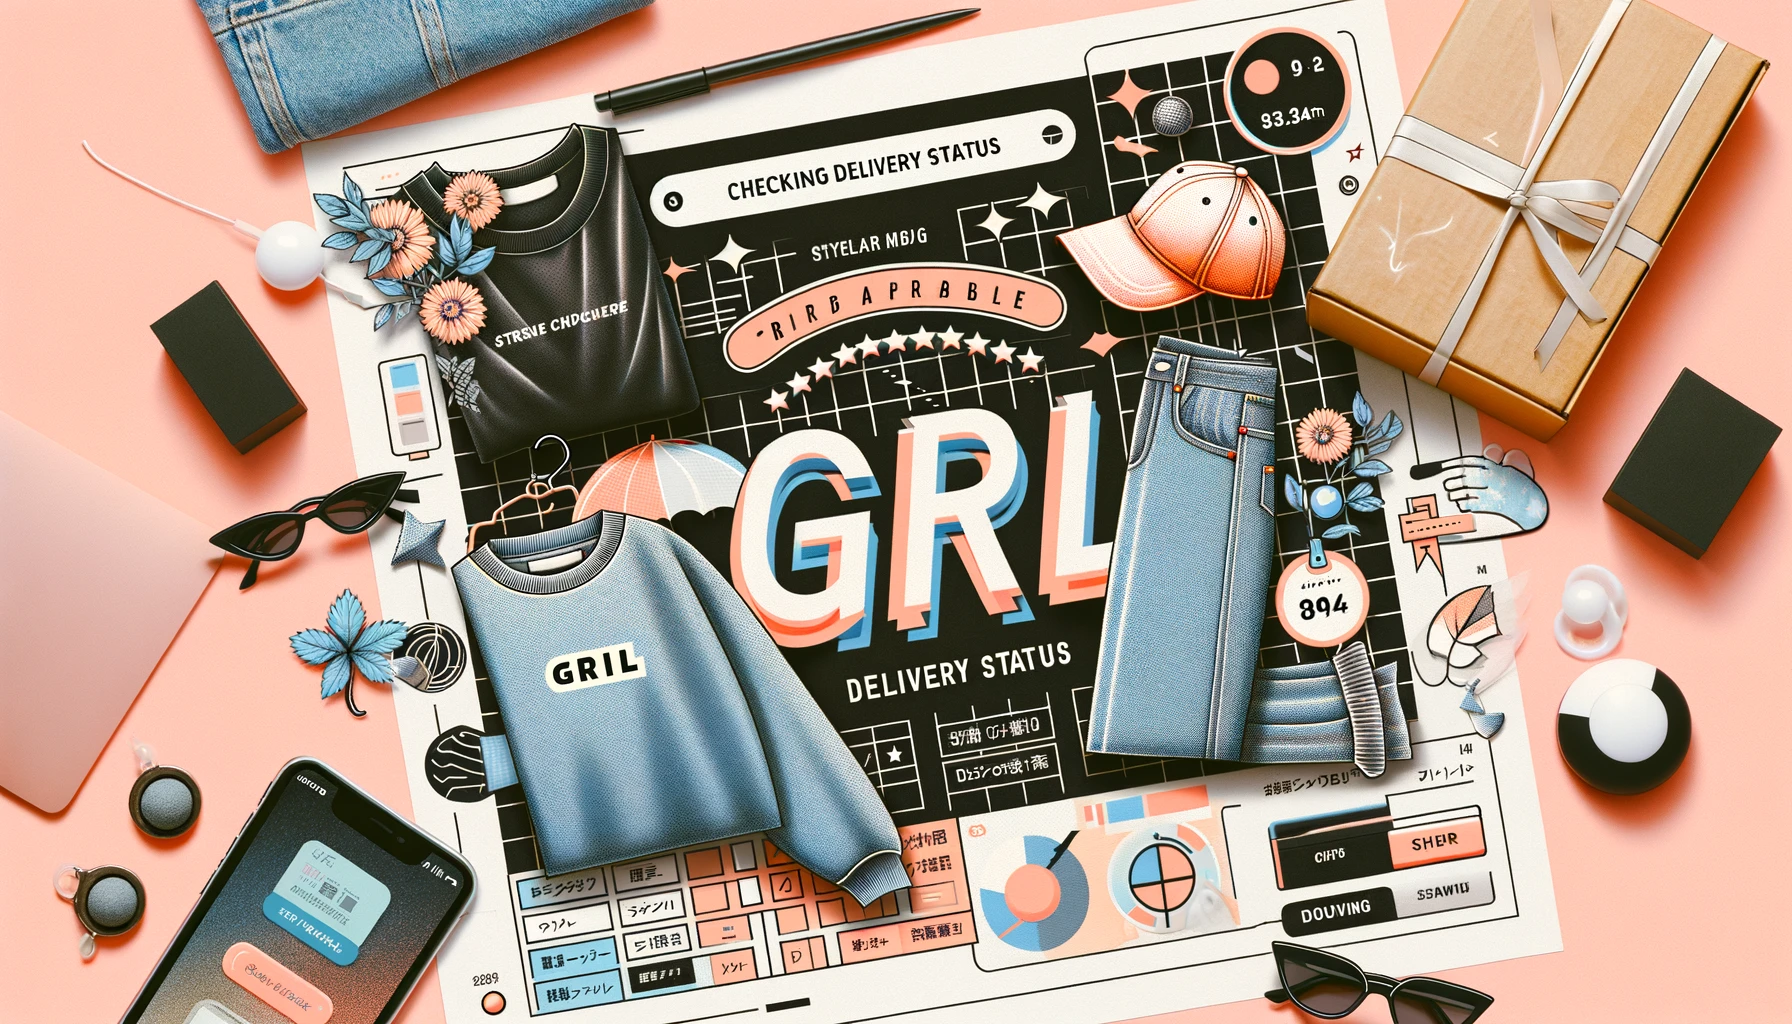 A stylish layout for a Japanese women's budget fashion brand named 'GRL' with a focus on checking delivery status. The image features trendy and affordable clothing items displayed attractively, with visual elements representing the process of checking delivery status. Incorporate the word 'GRL' prominently in the design. The background should be vibrant and fashionable, reflecting the brand's appeal to young women. The image should be in a 16:9 aspect ratio.